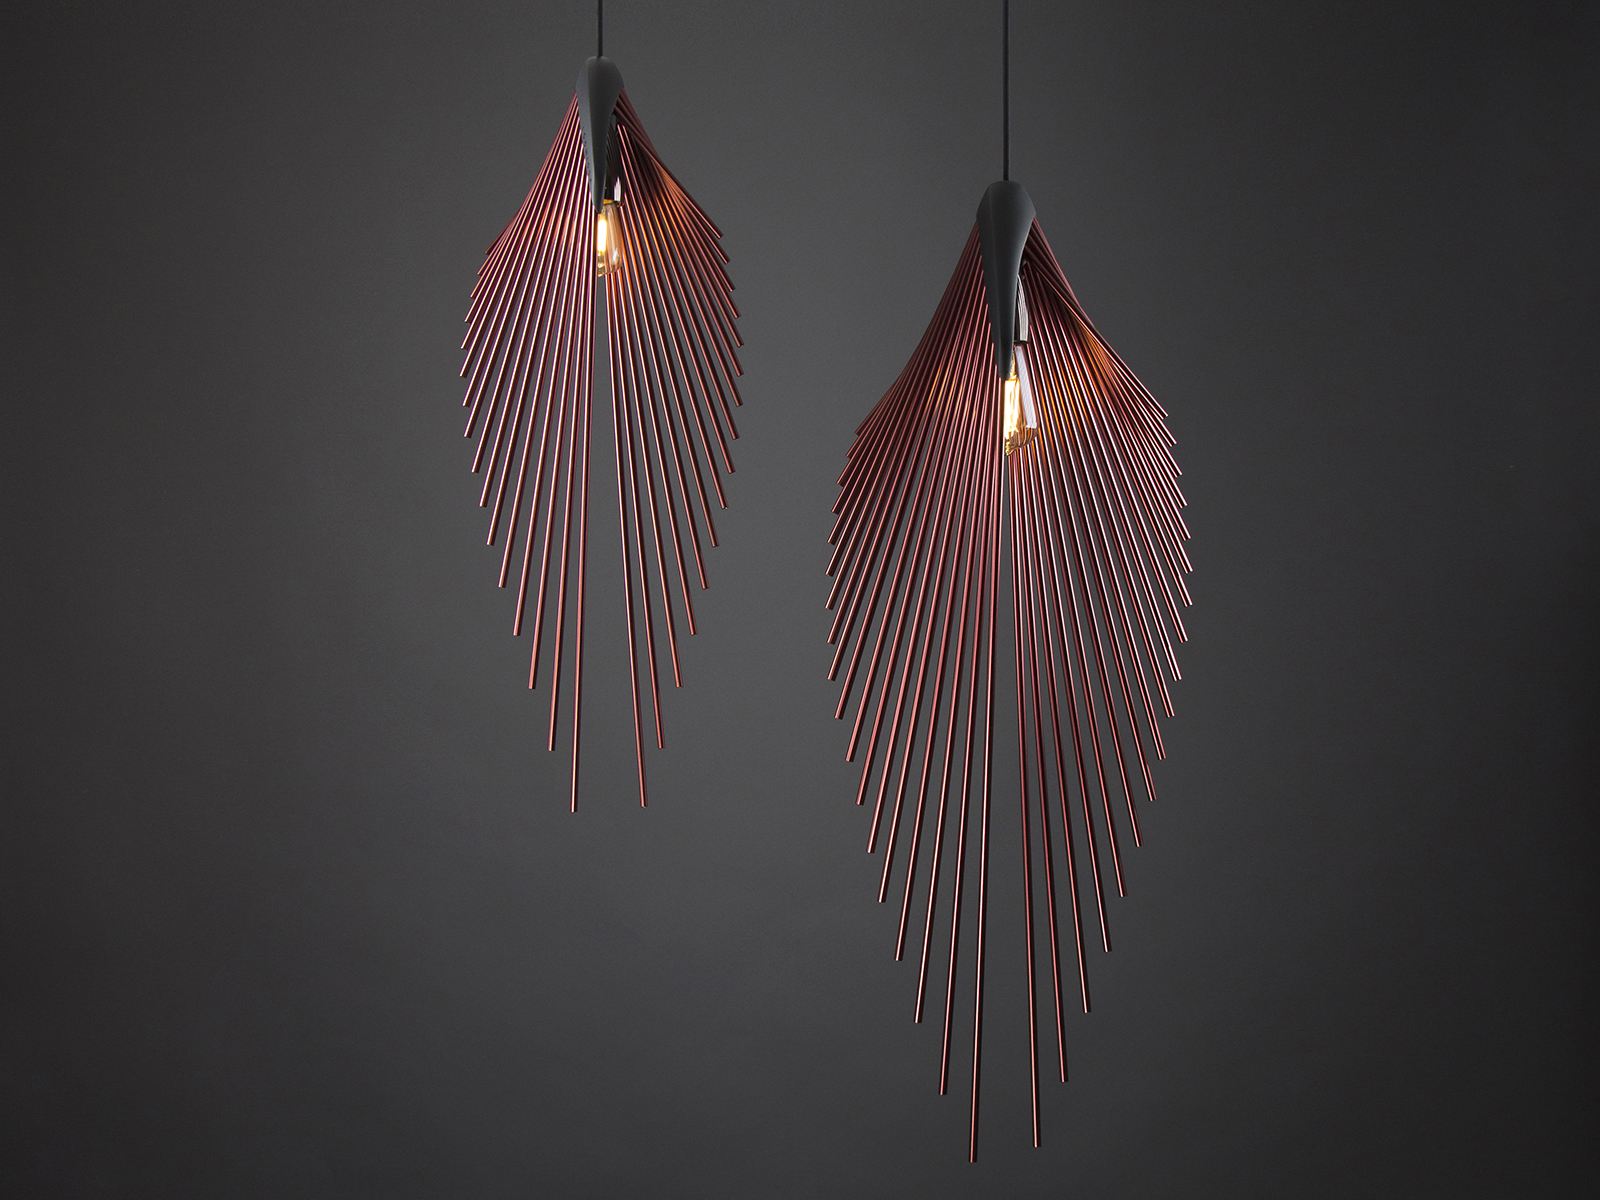 Two hanging lights in pale red set against a dark gray background